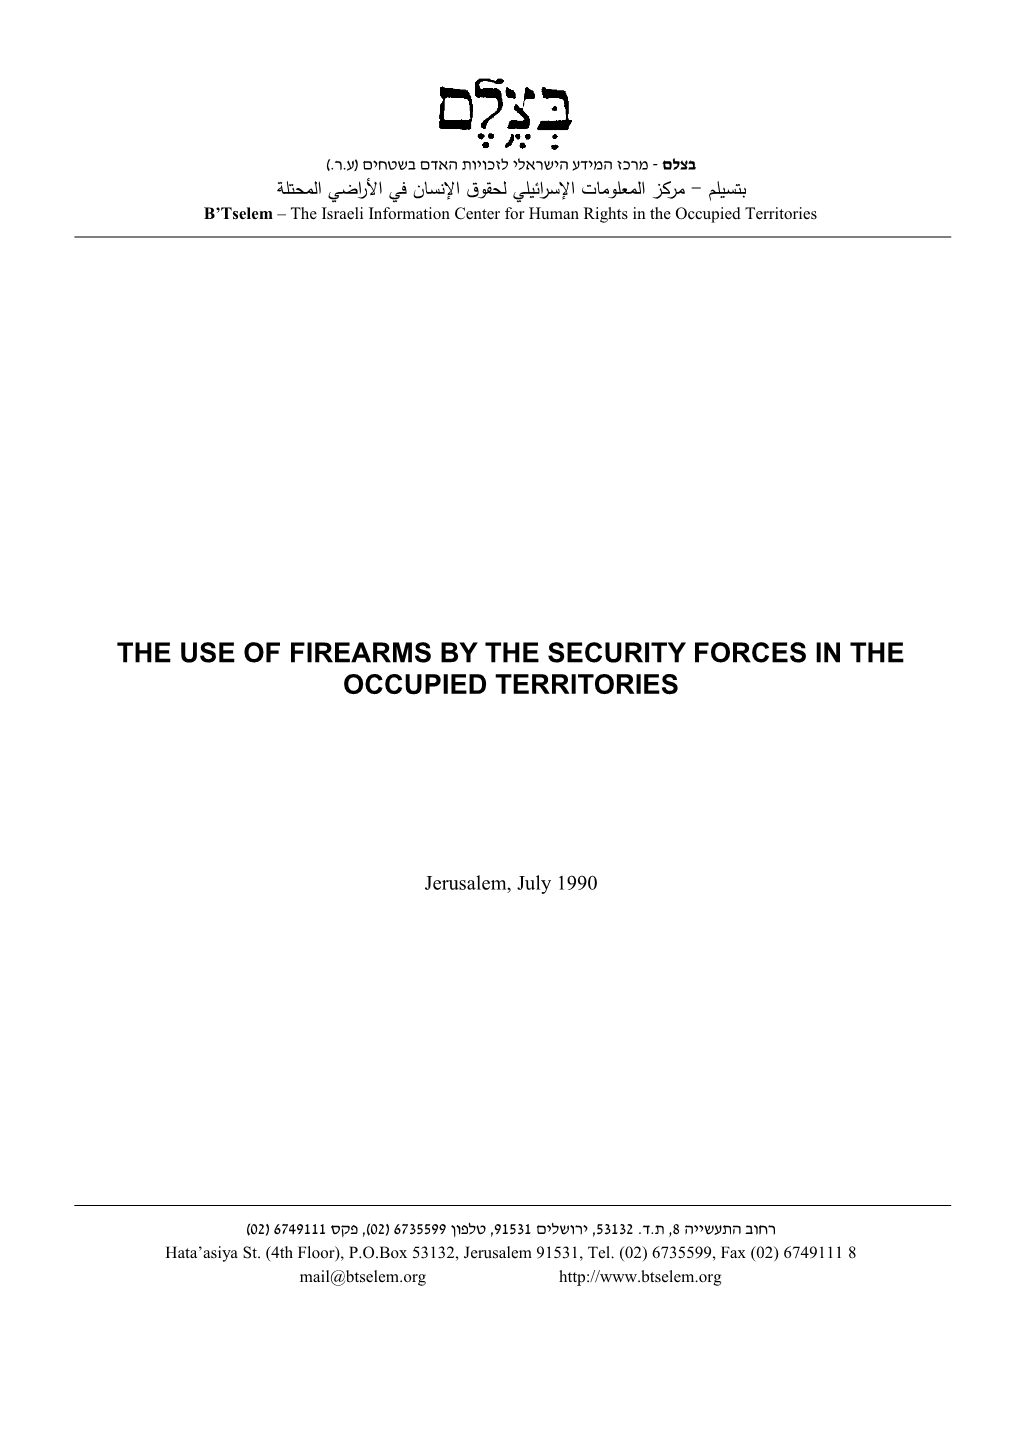 B'tselem Report: the Use of Firearms by the Security Forces in the Occupied Territories